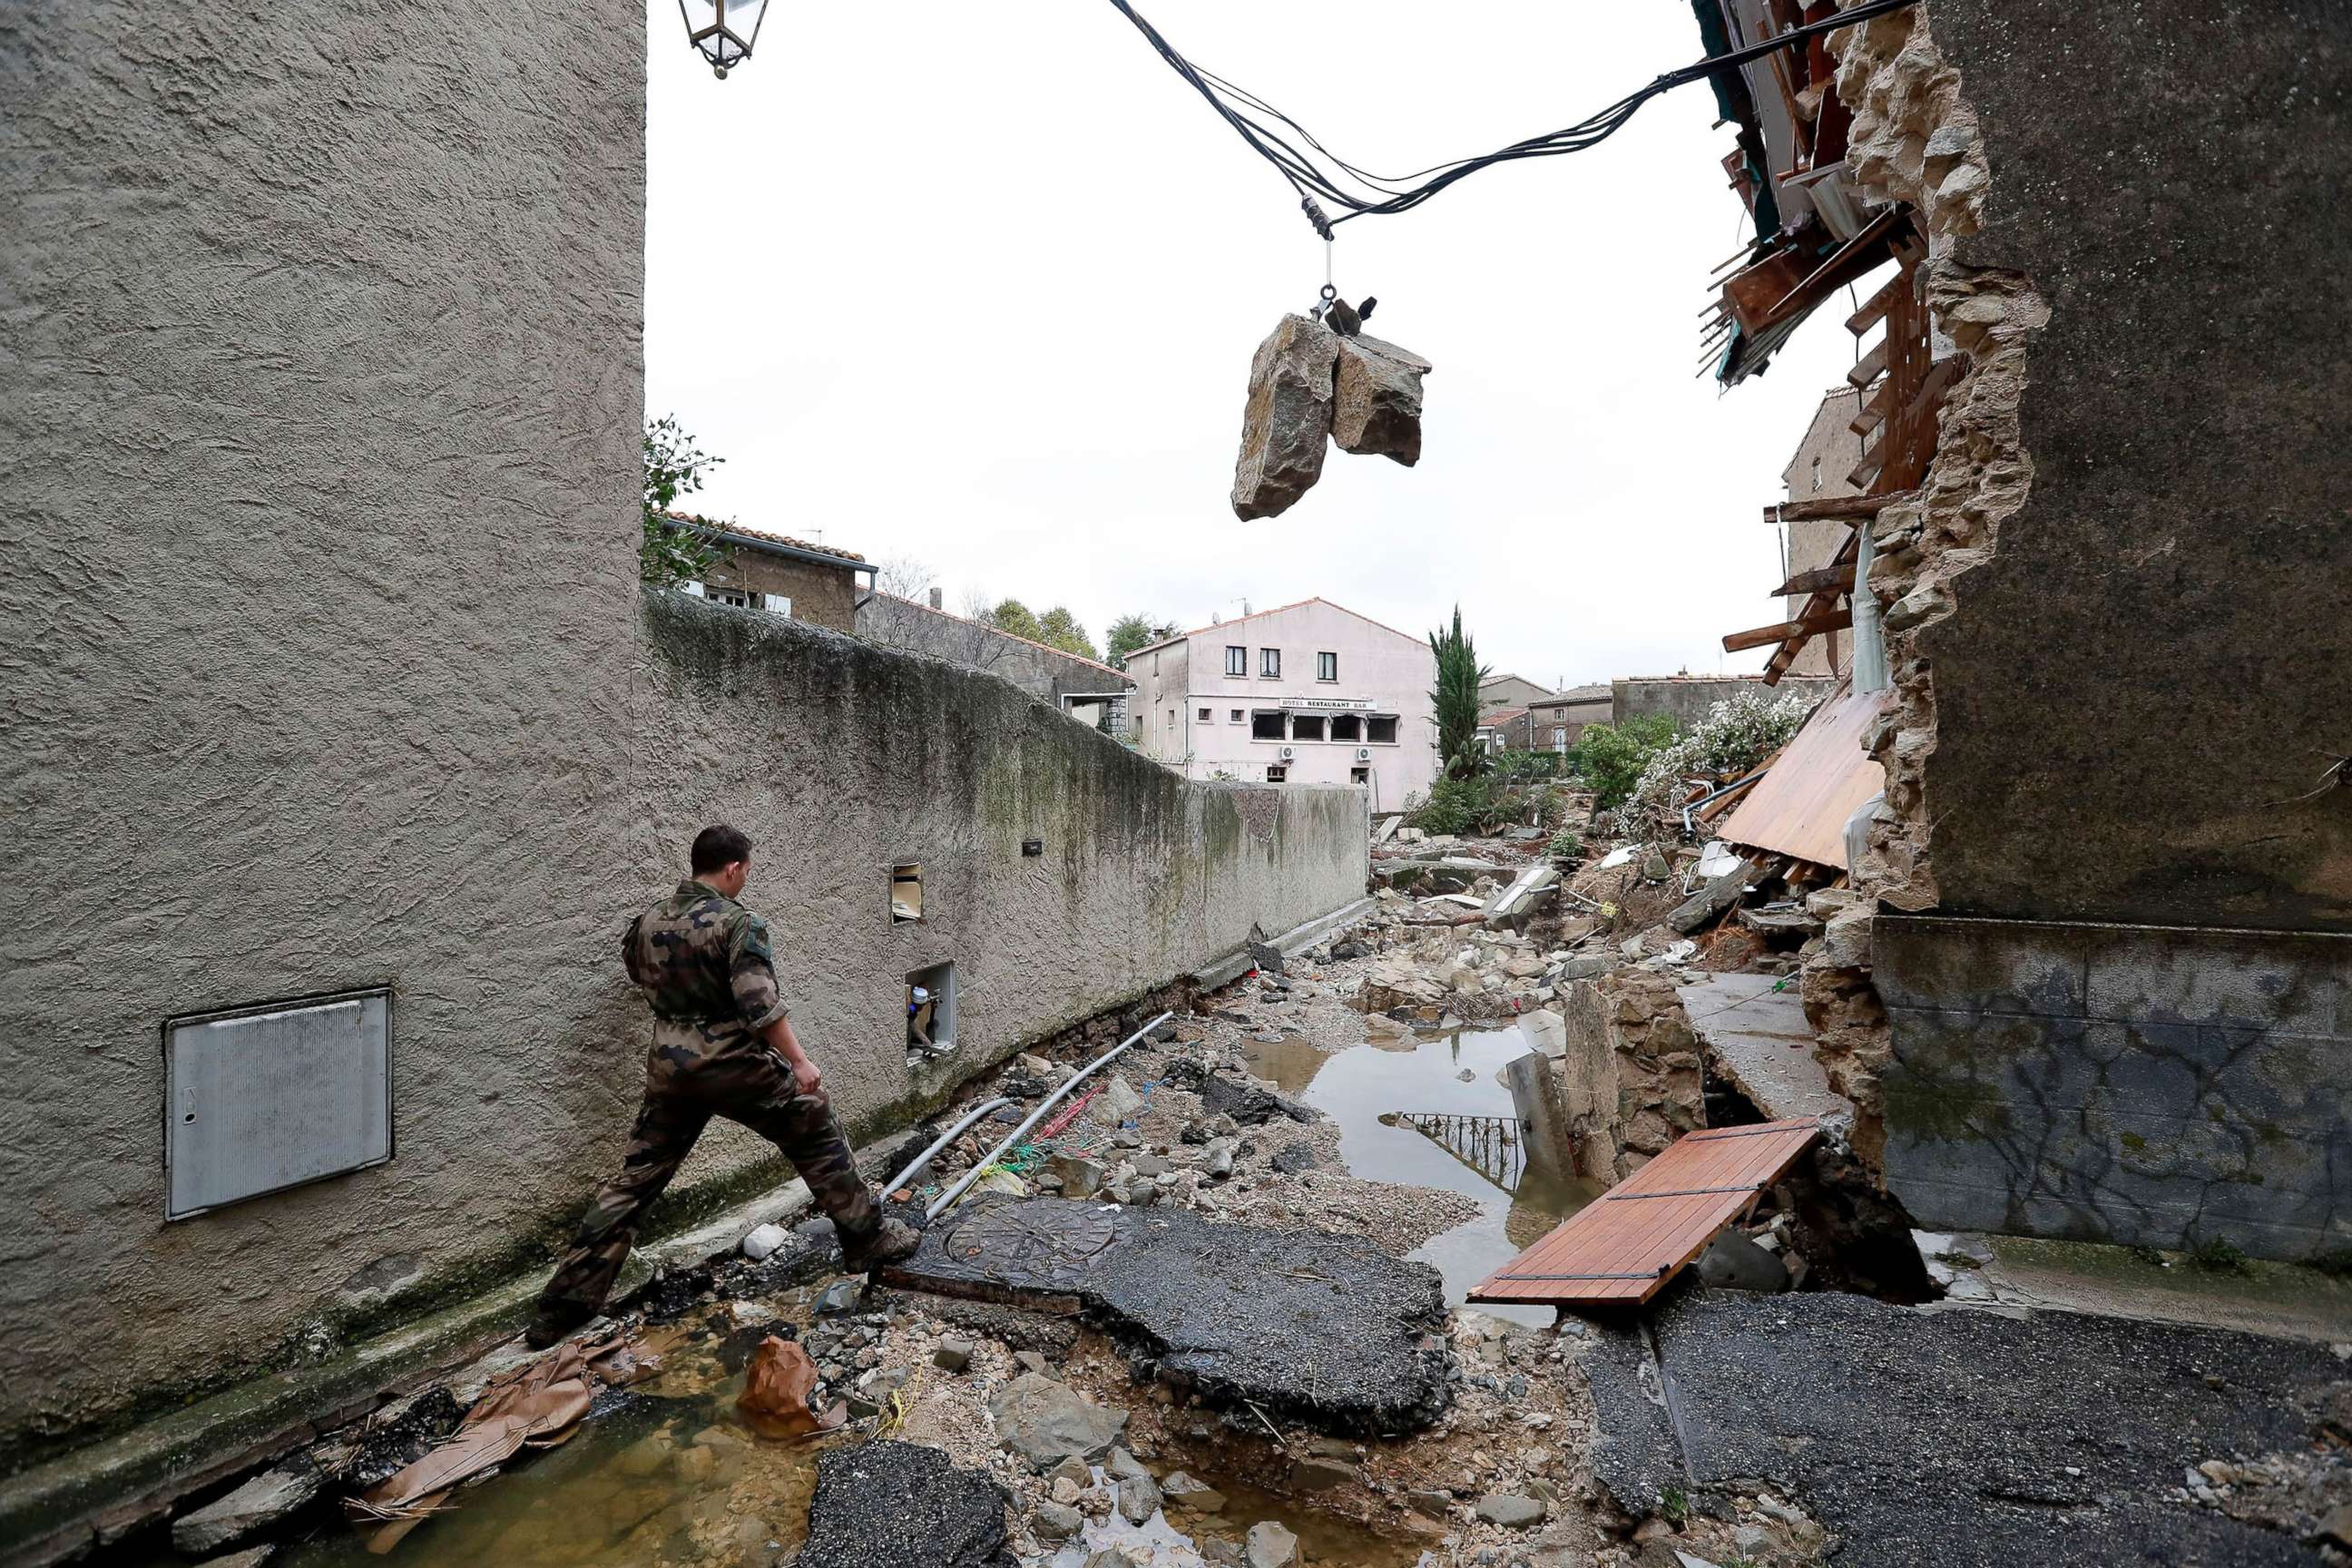 PHOTO: A military officer walks through a damaged street due to heavy rain falls, flash floods and violent storm that hit Aude department overnight in Villegailhenc, France, Oct. 15, 2018.